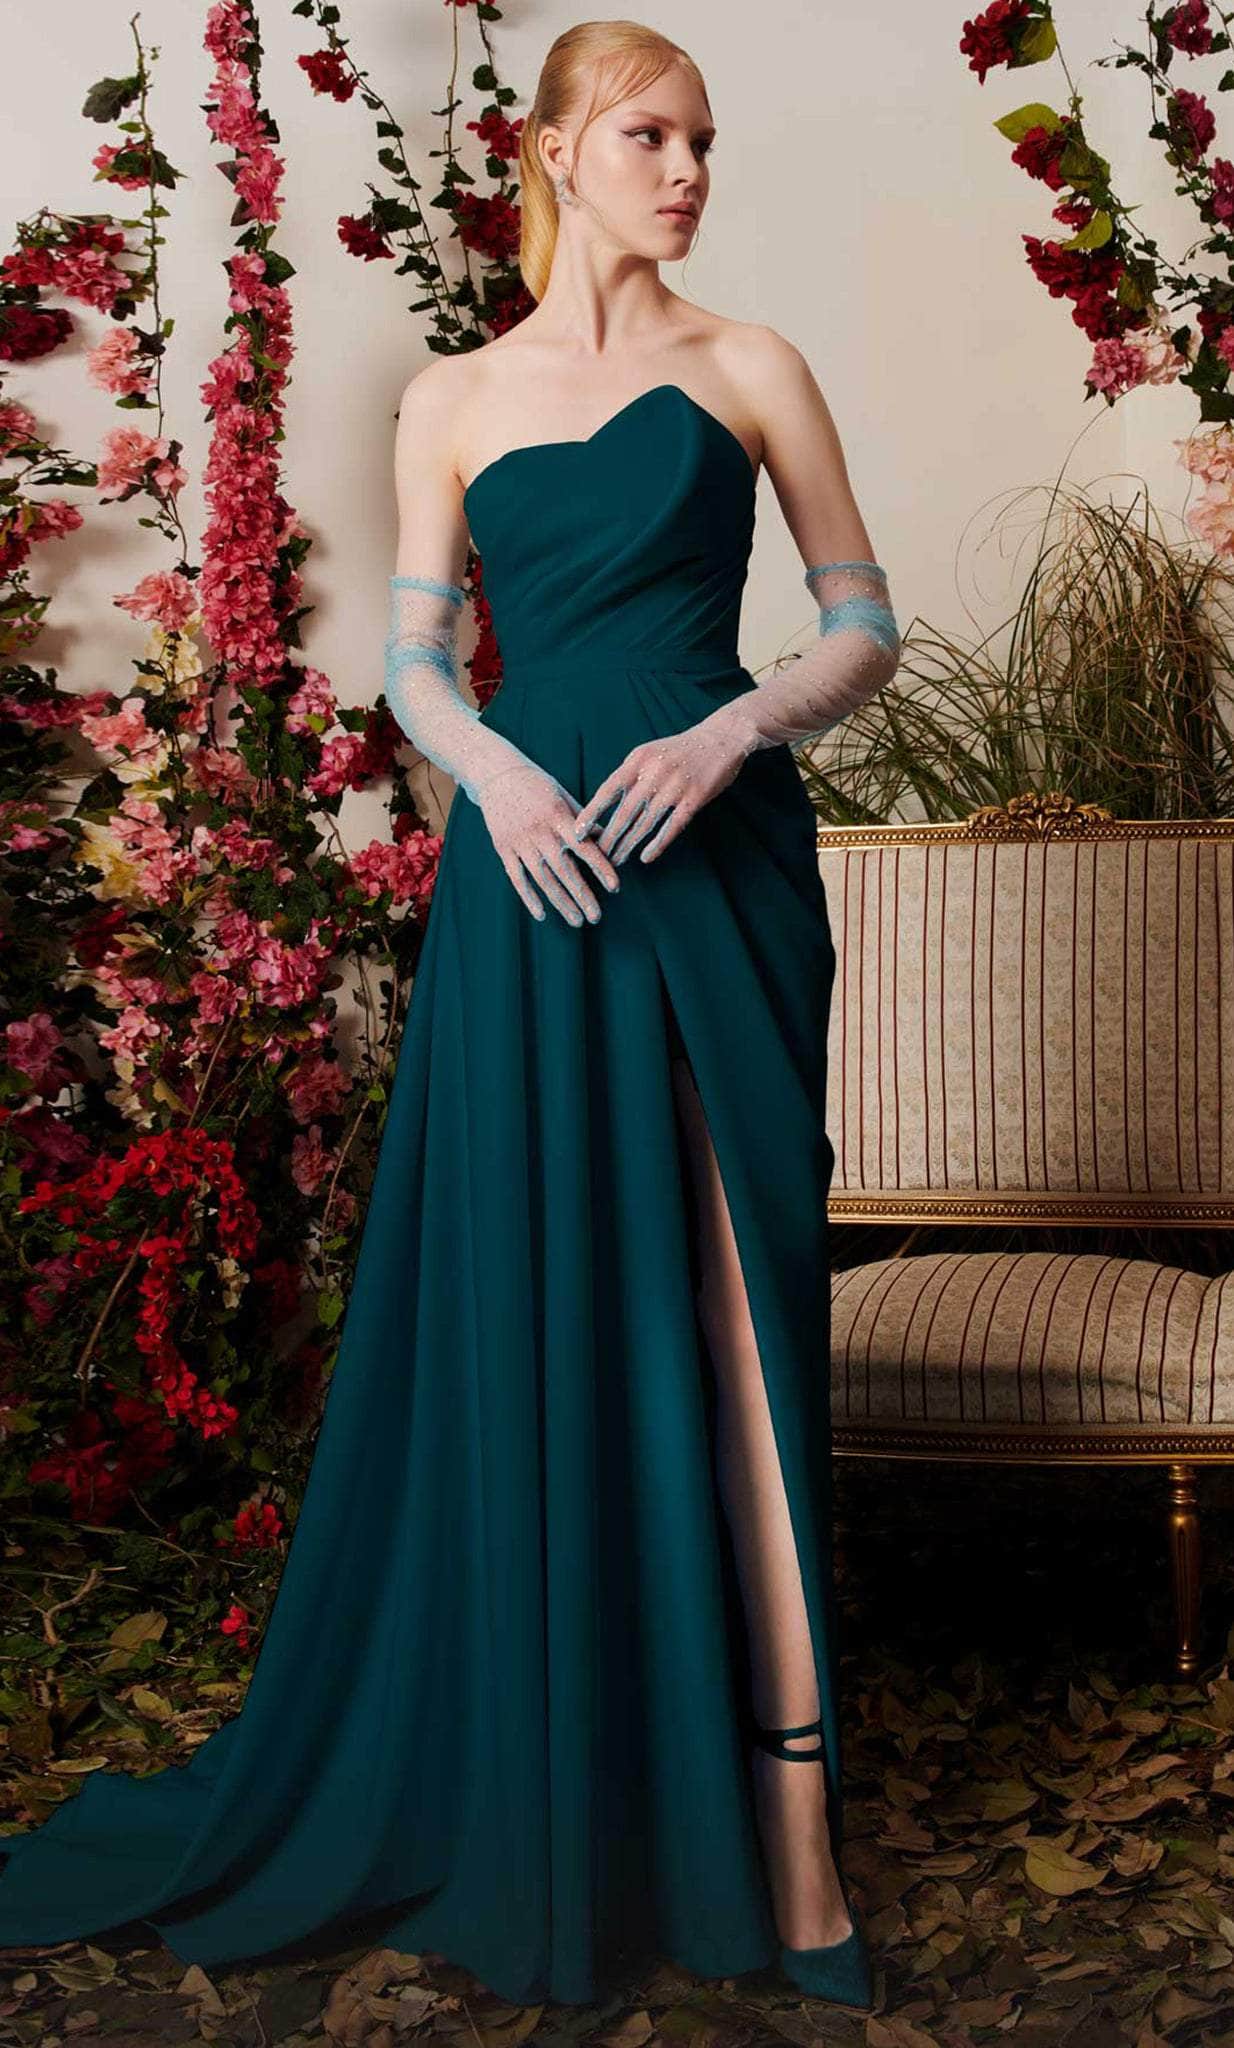 MNM COUTURE N0503 - Draped Bodice Evening Gown Formal Gowns 4 / Green